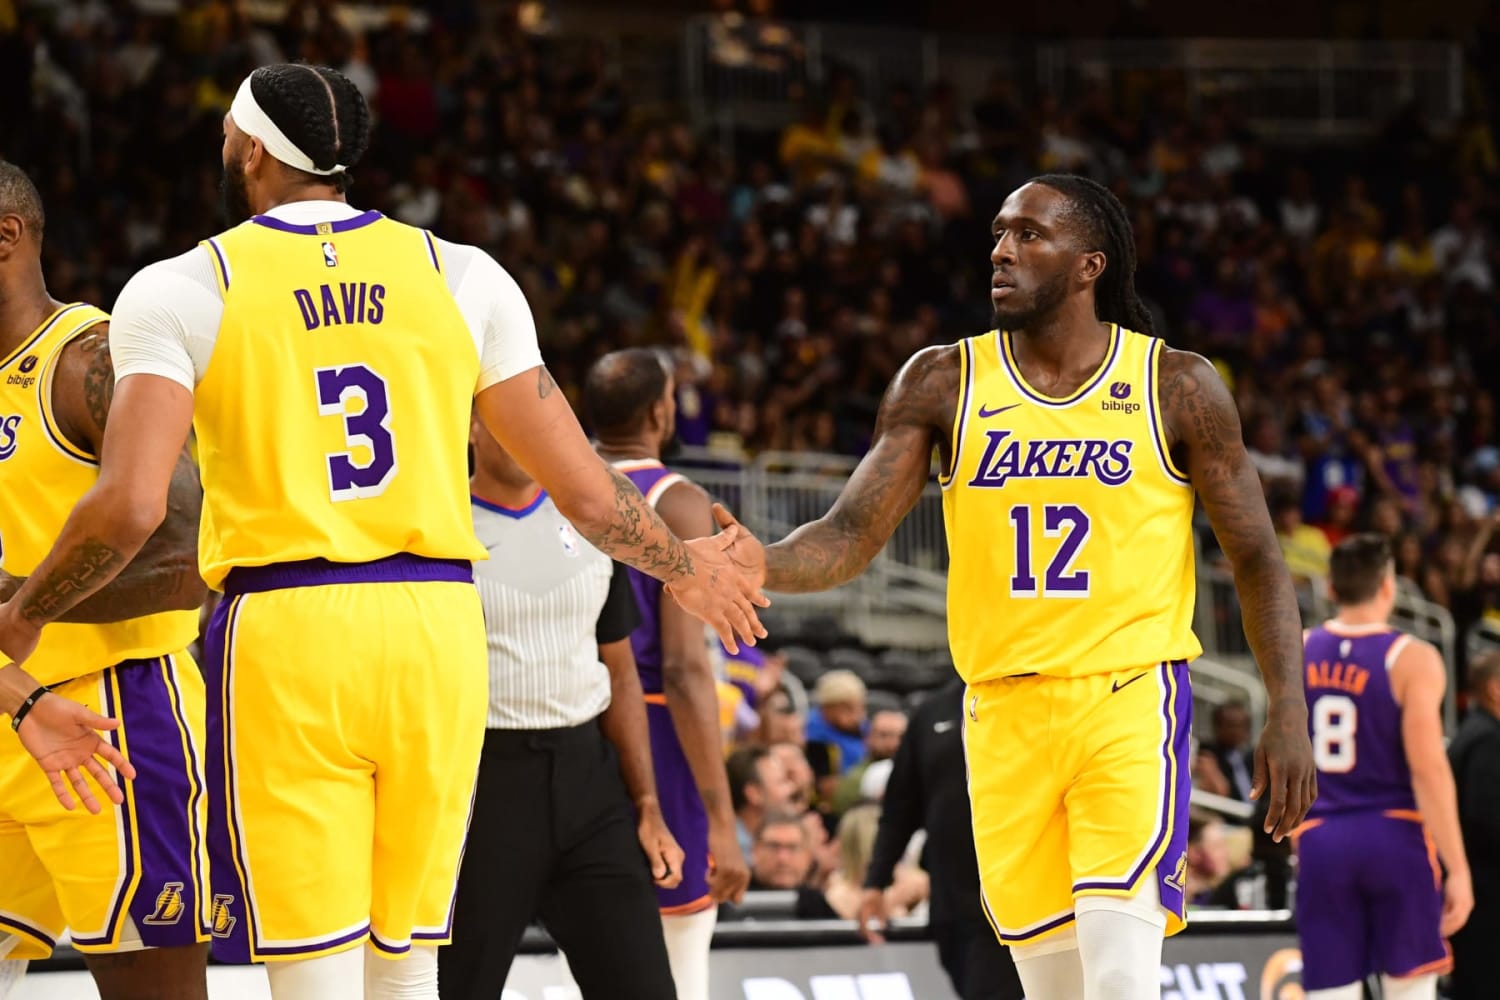 Darren Rovell on X: In 20 minutes, the lowest Lakers season